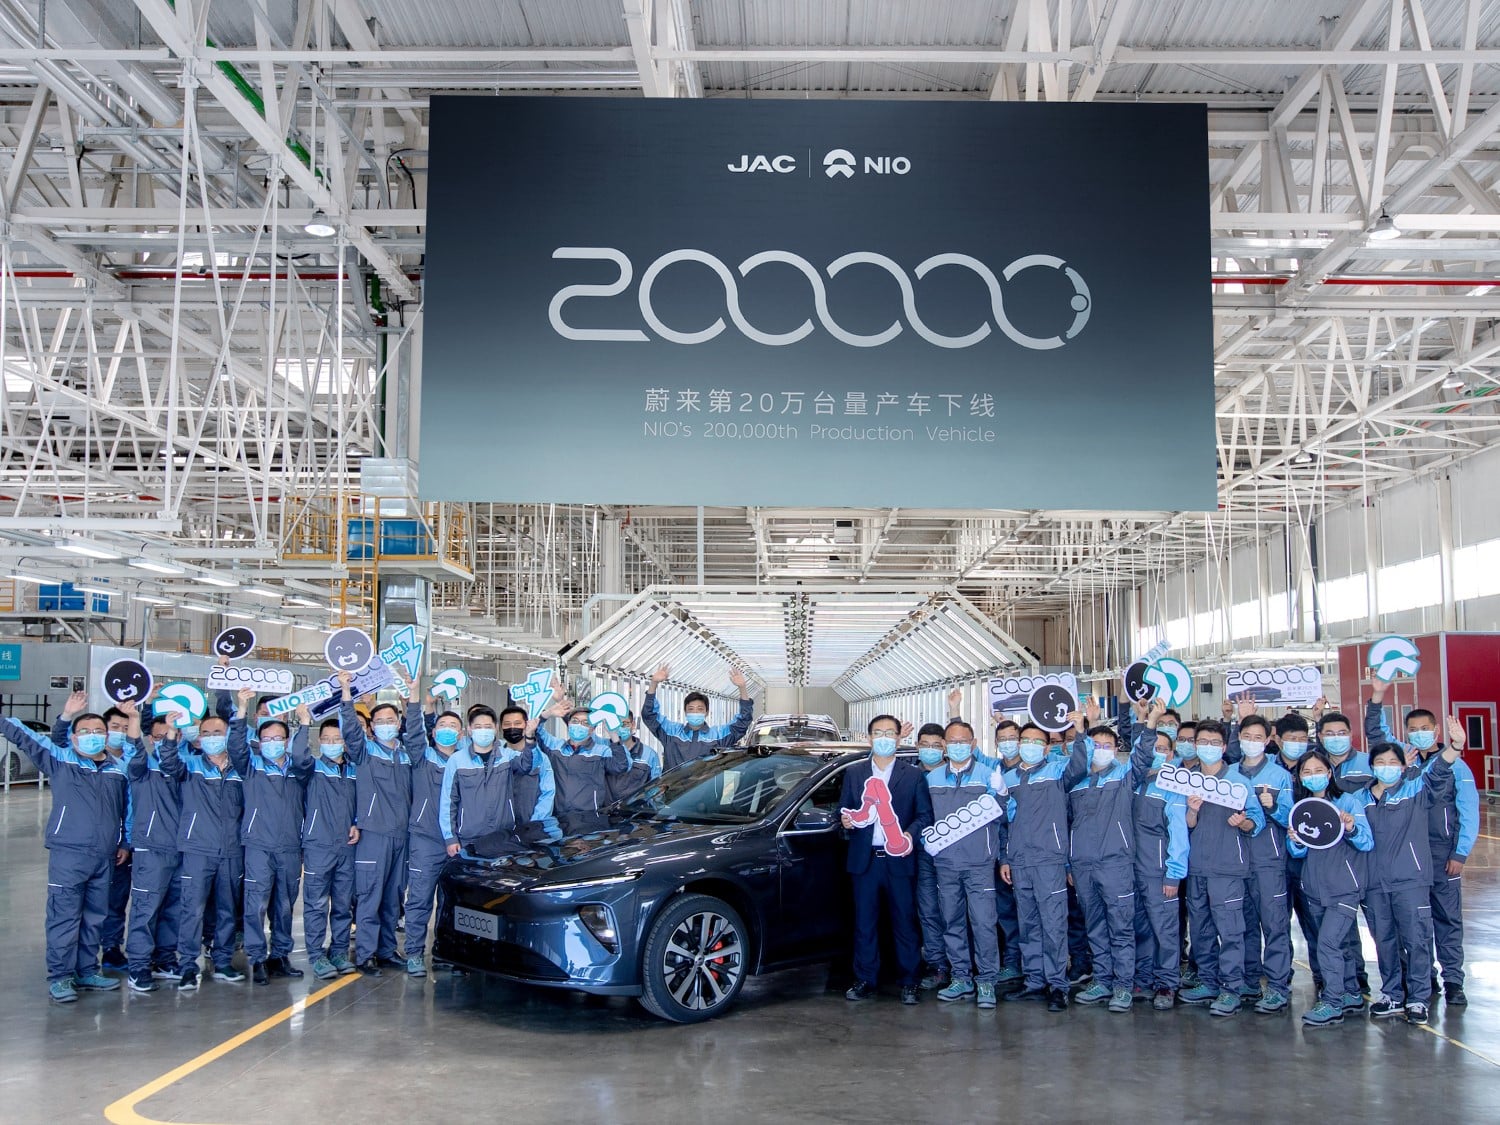 BREAKING: NIO's 200,000th production vehicle rolls off line-CnEVPost